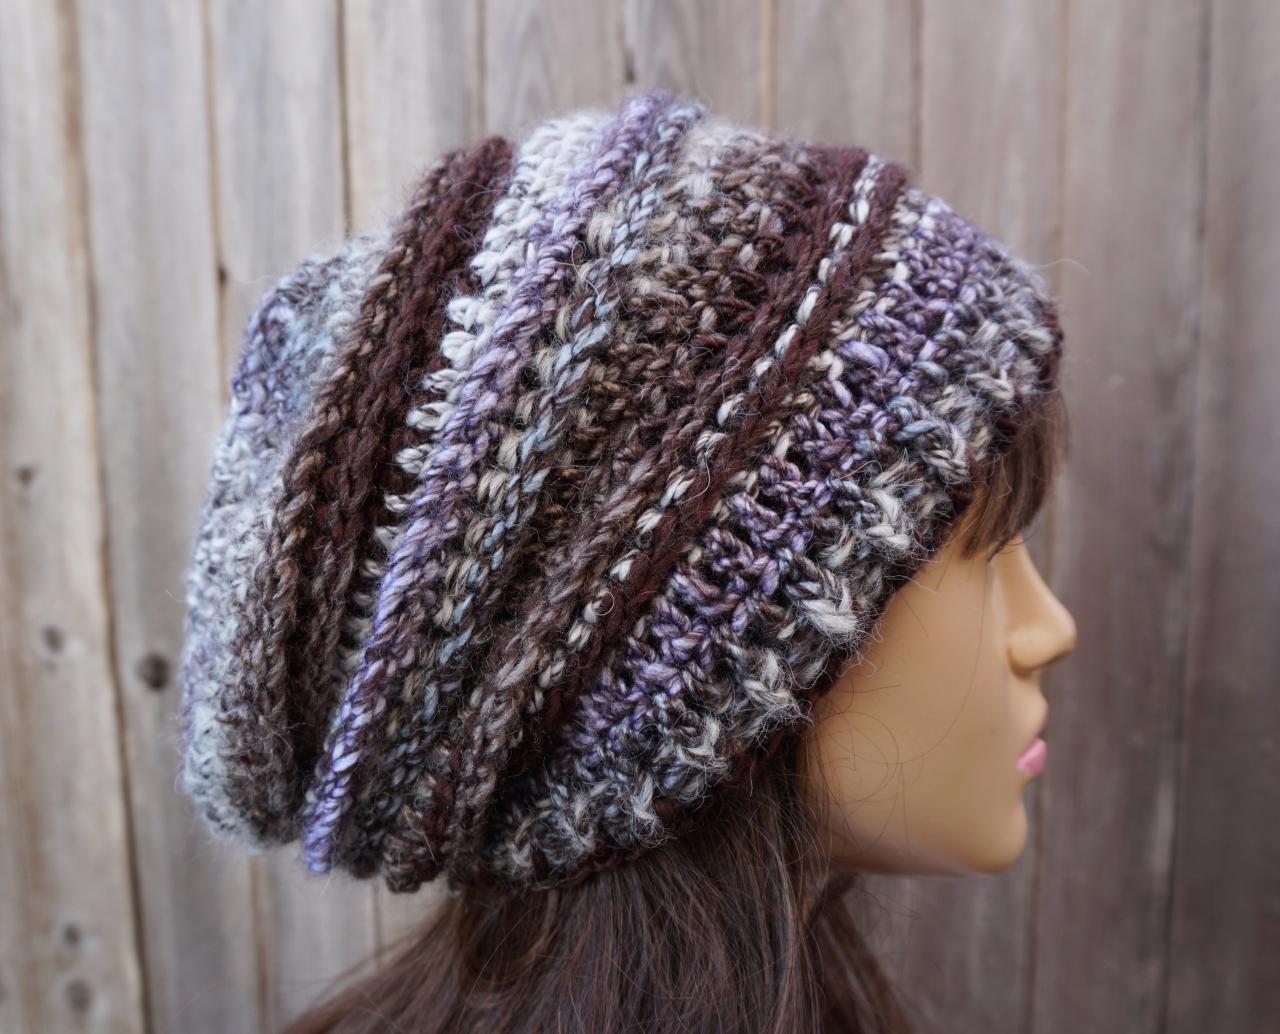 Crochet Hat - Slouchy Hat -multicolored - Winter Accessories Autumn Accessories Fall Fashion